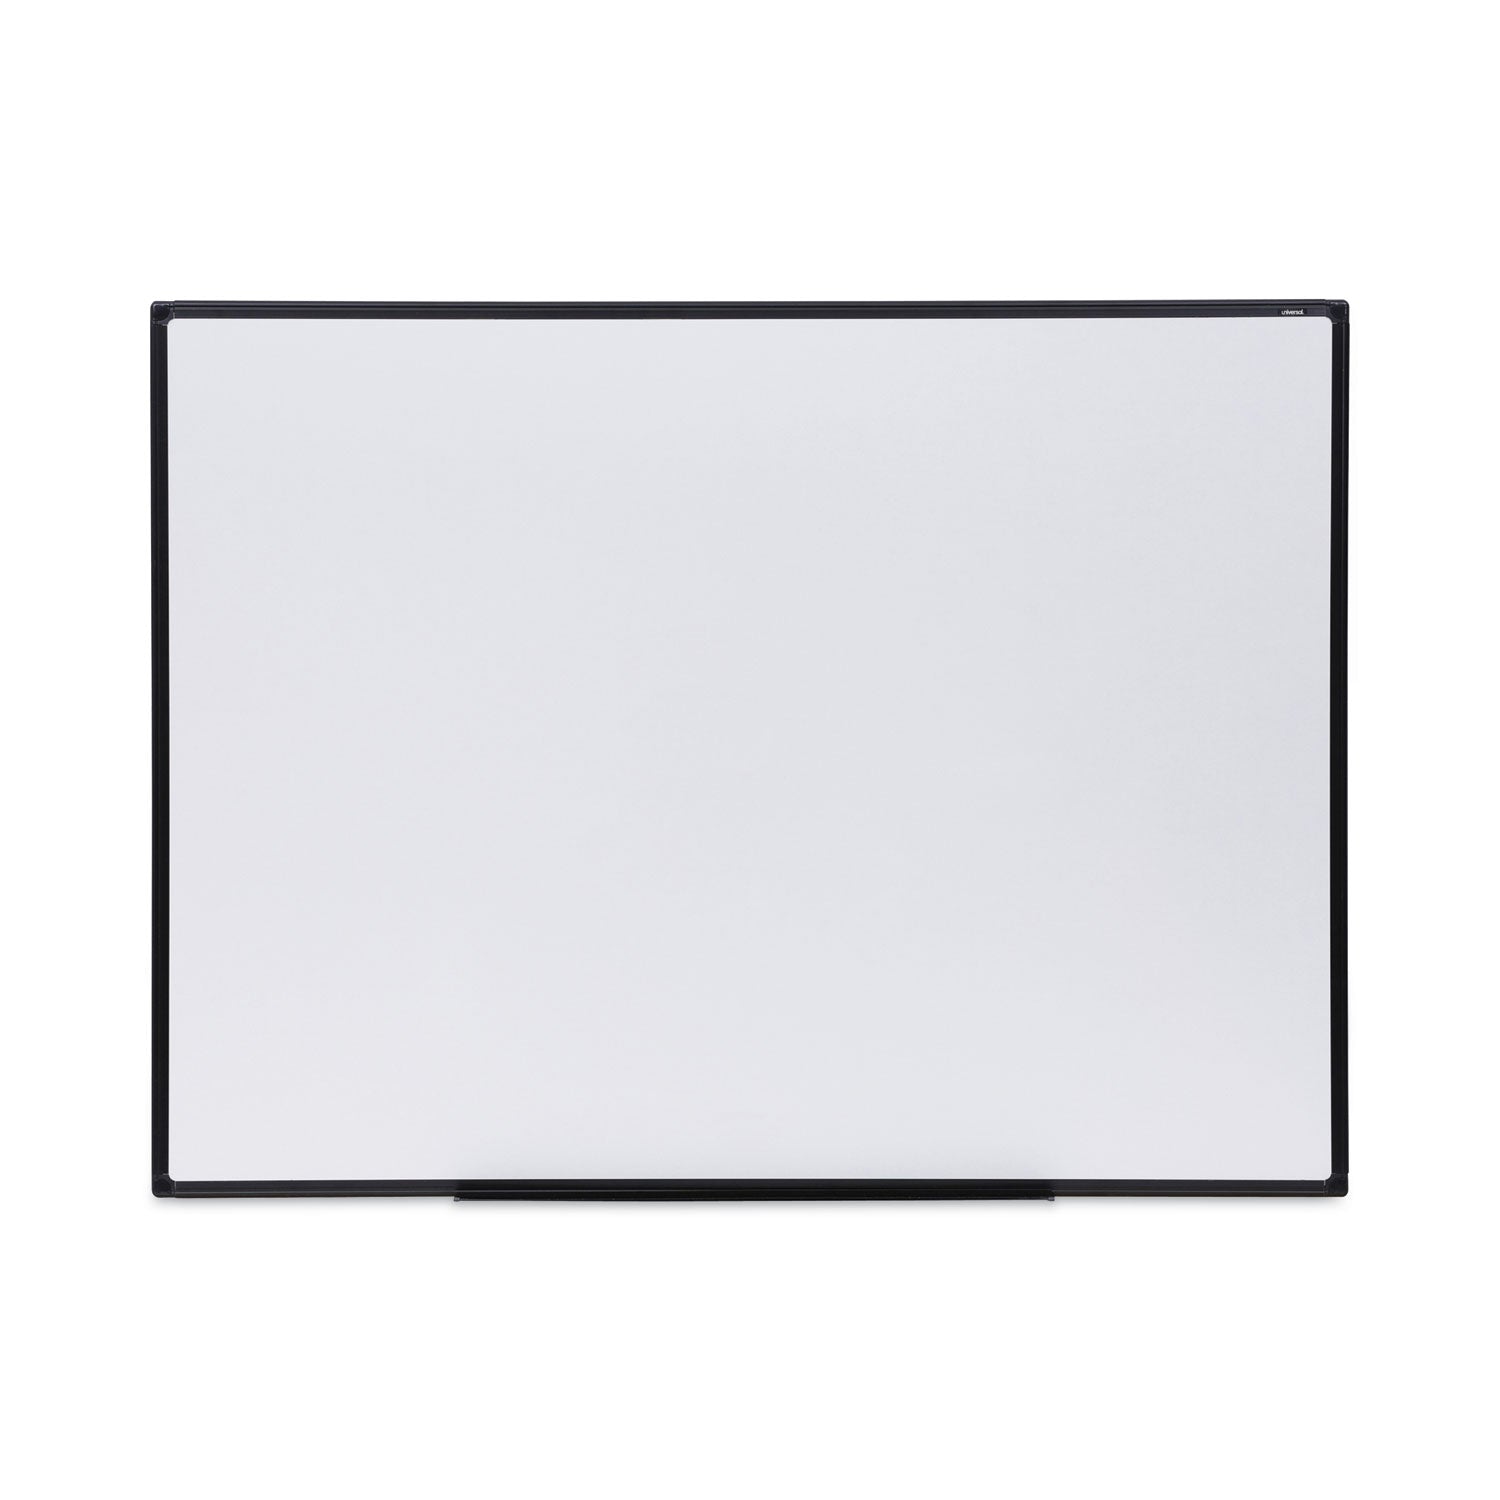 Design Series Deluxe Dry Erase Board, 48 x 36, White Surface, Black Anodized Aluminum Frame - 